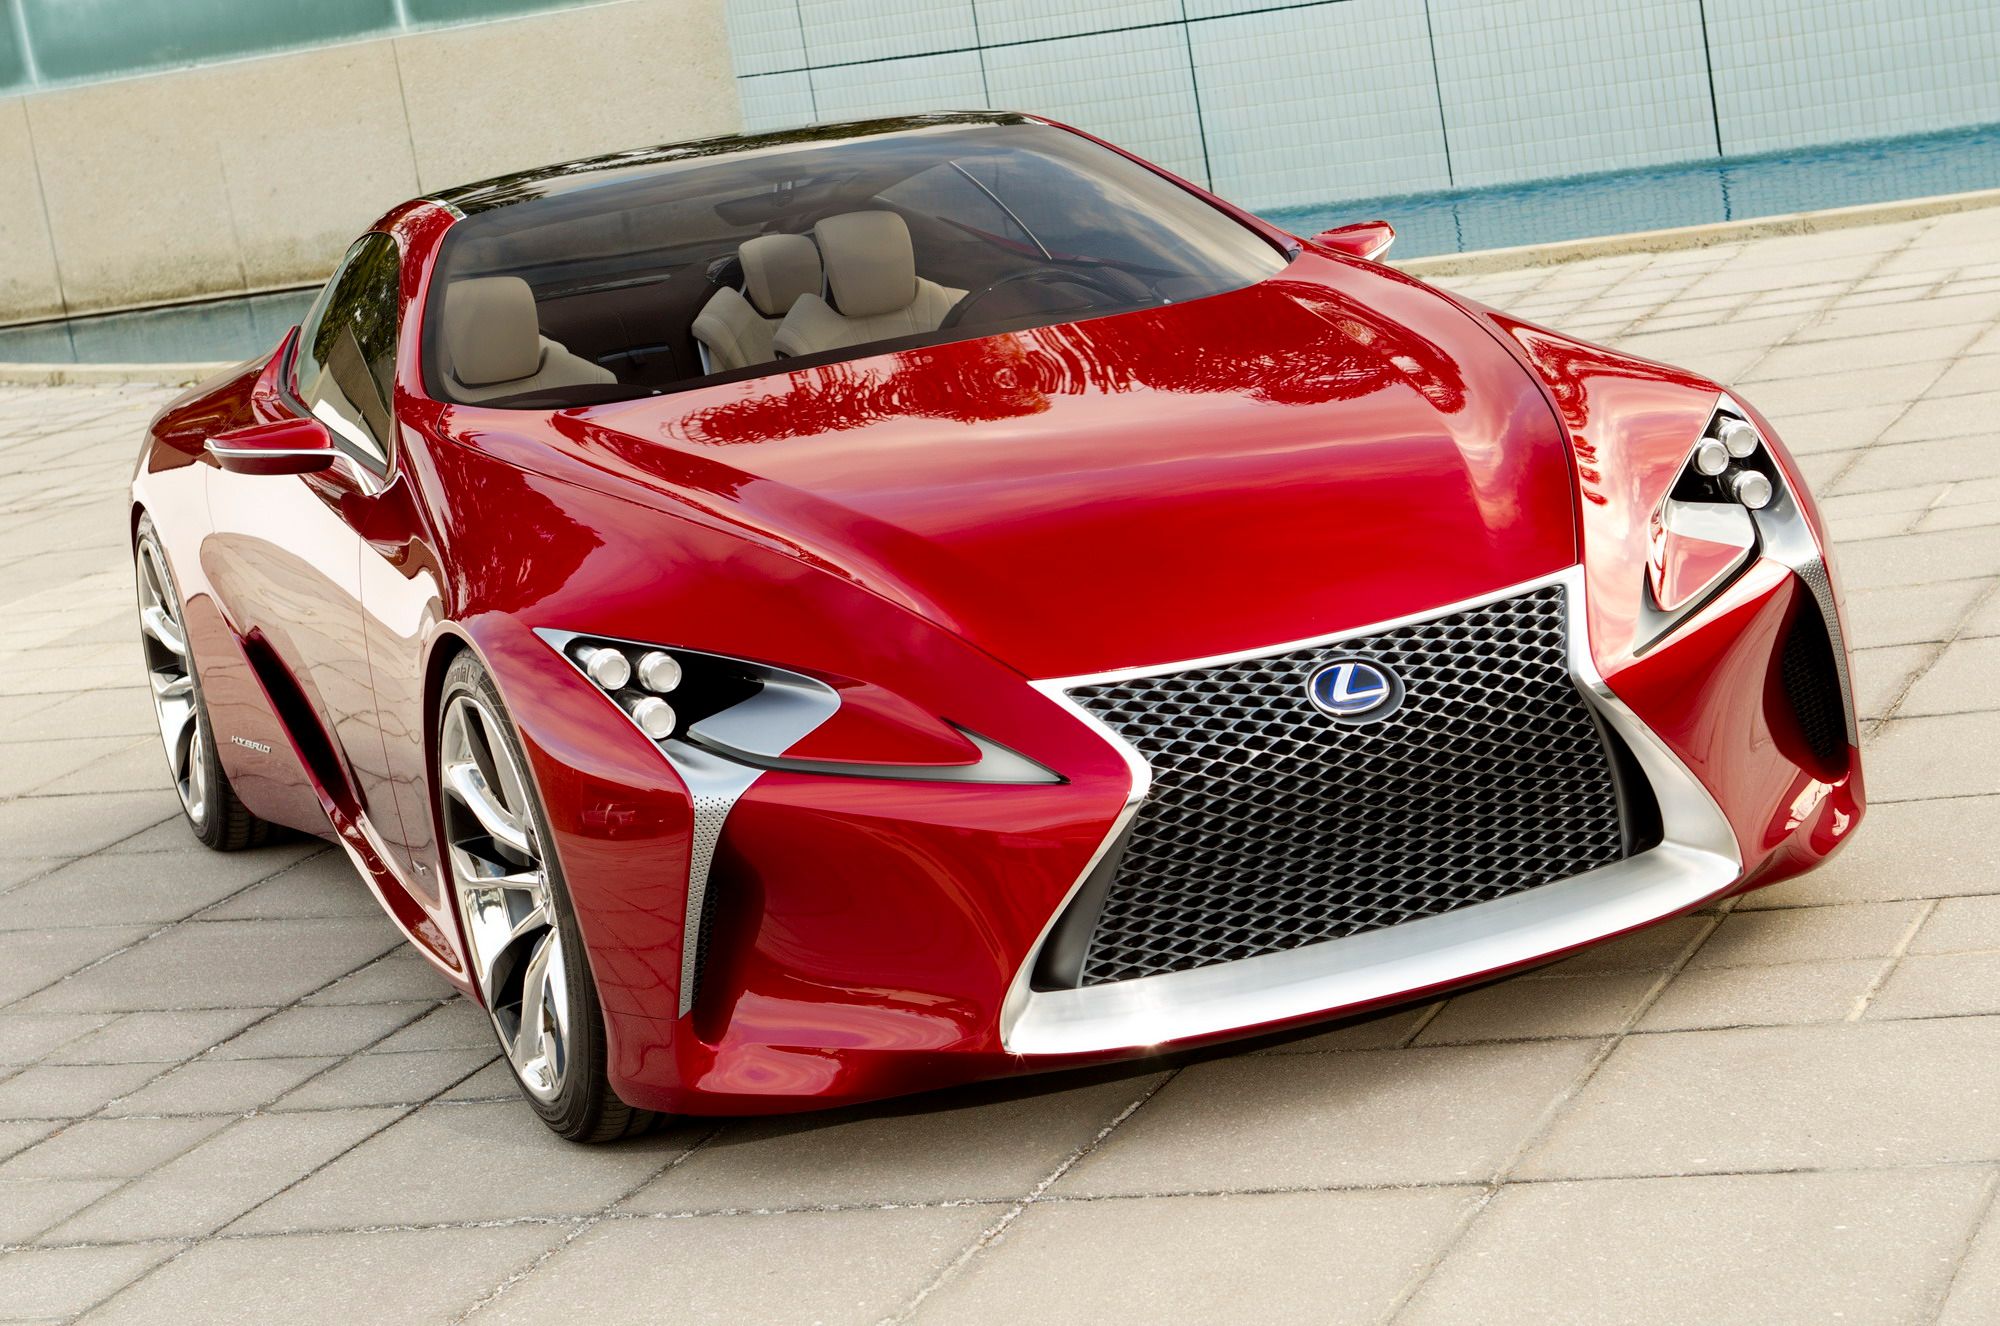 2015 Lexus Confirms LF-Lc Concept Will Hit Production in 2016 